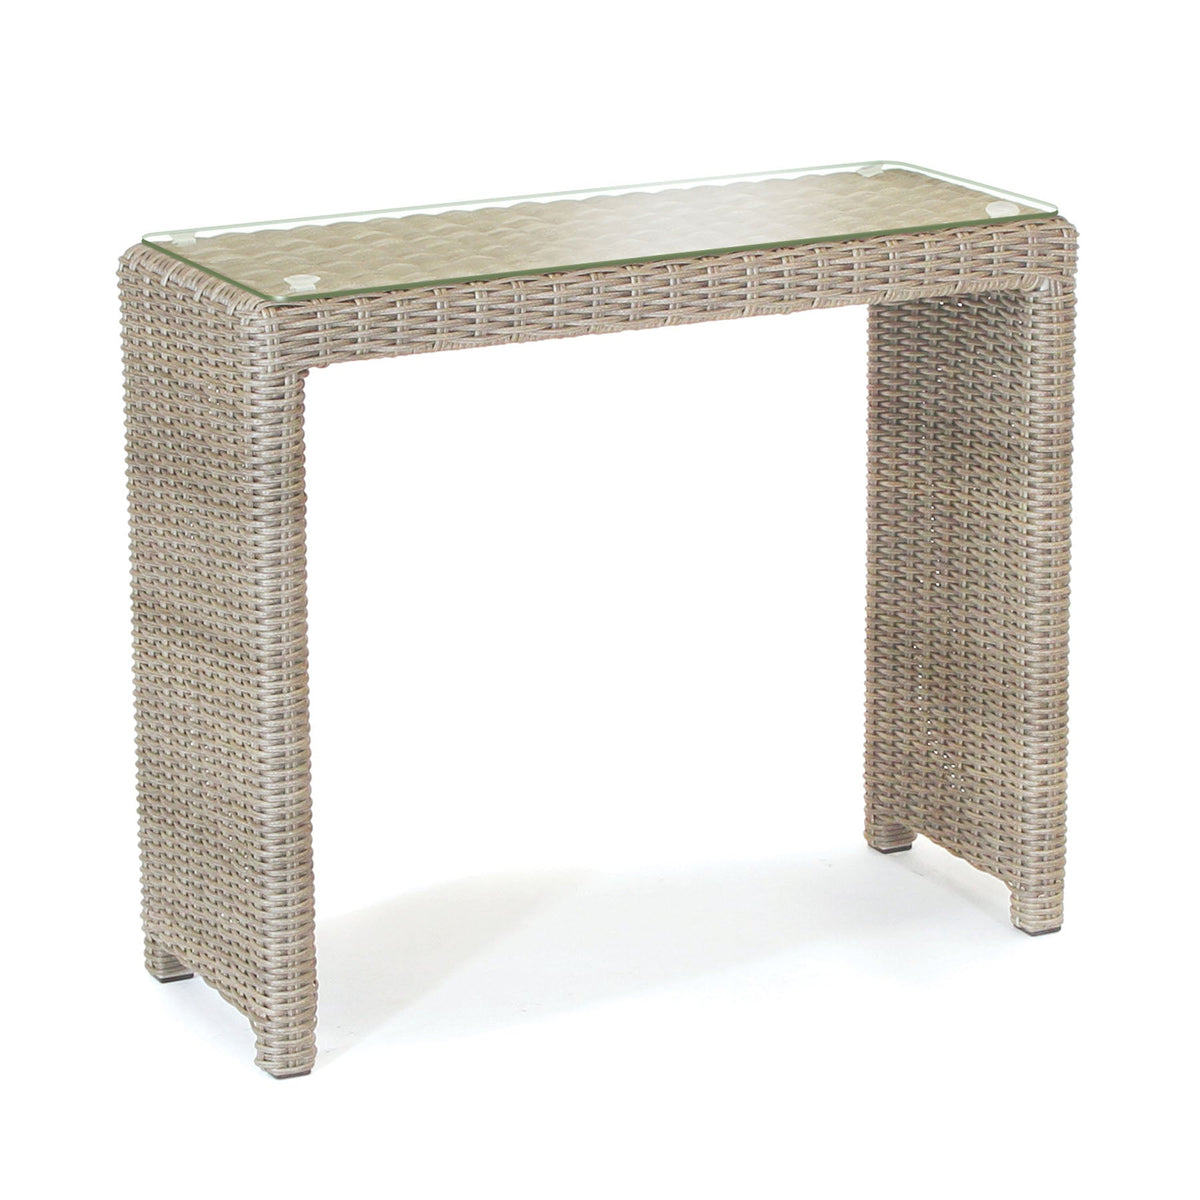 Kettler Palma Oyster Wicker Casual Dining Glass Top Side Table *Damaged Box*